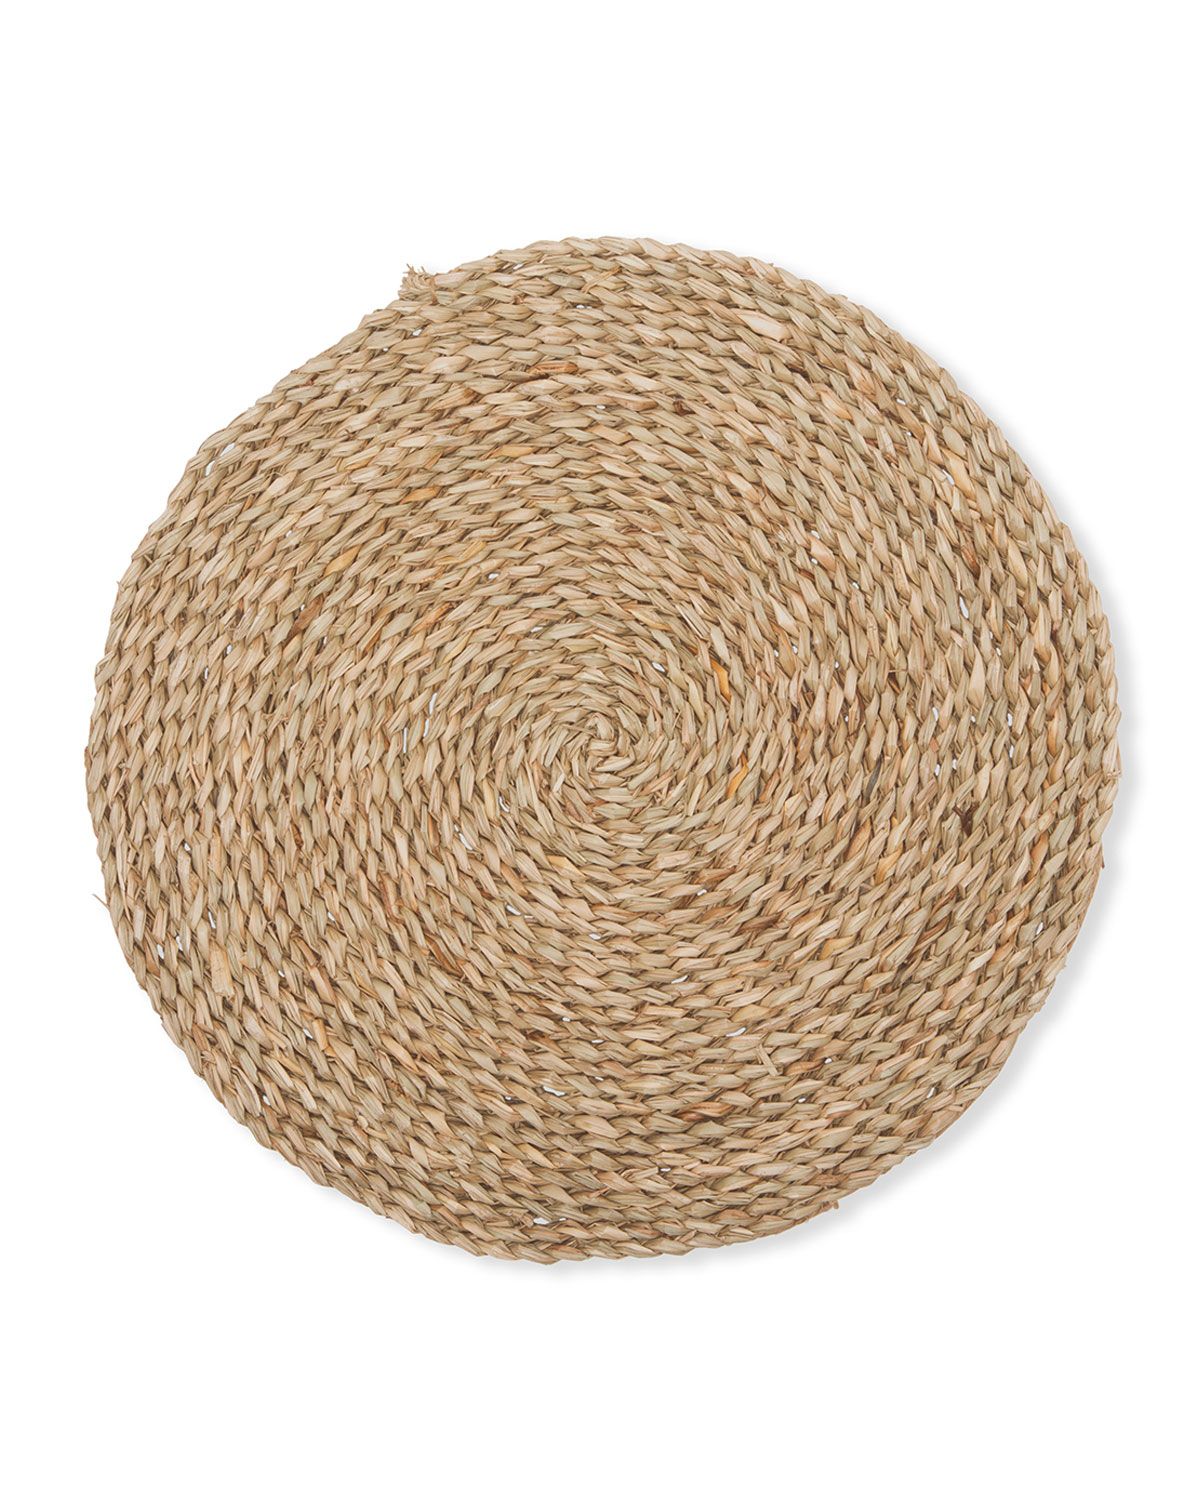 Lucian Round Aged Seagrass Chargers, Set of 4 | Neiman Marcus